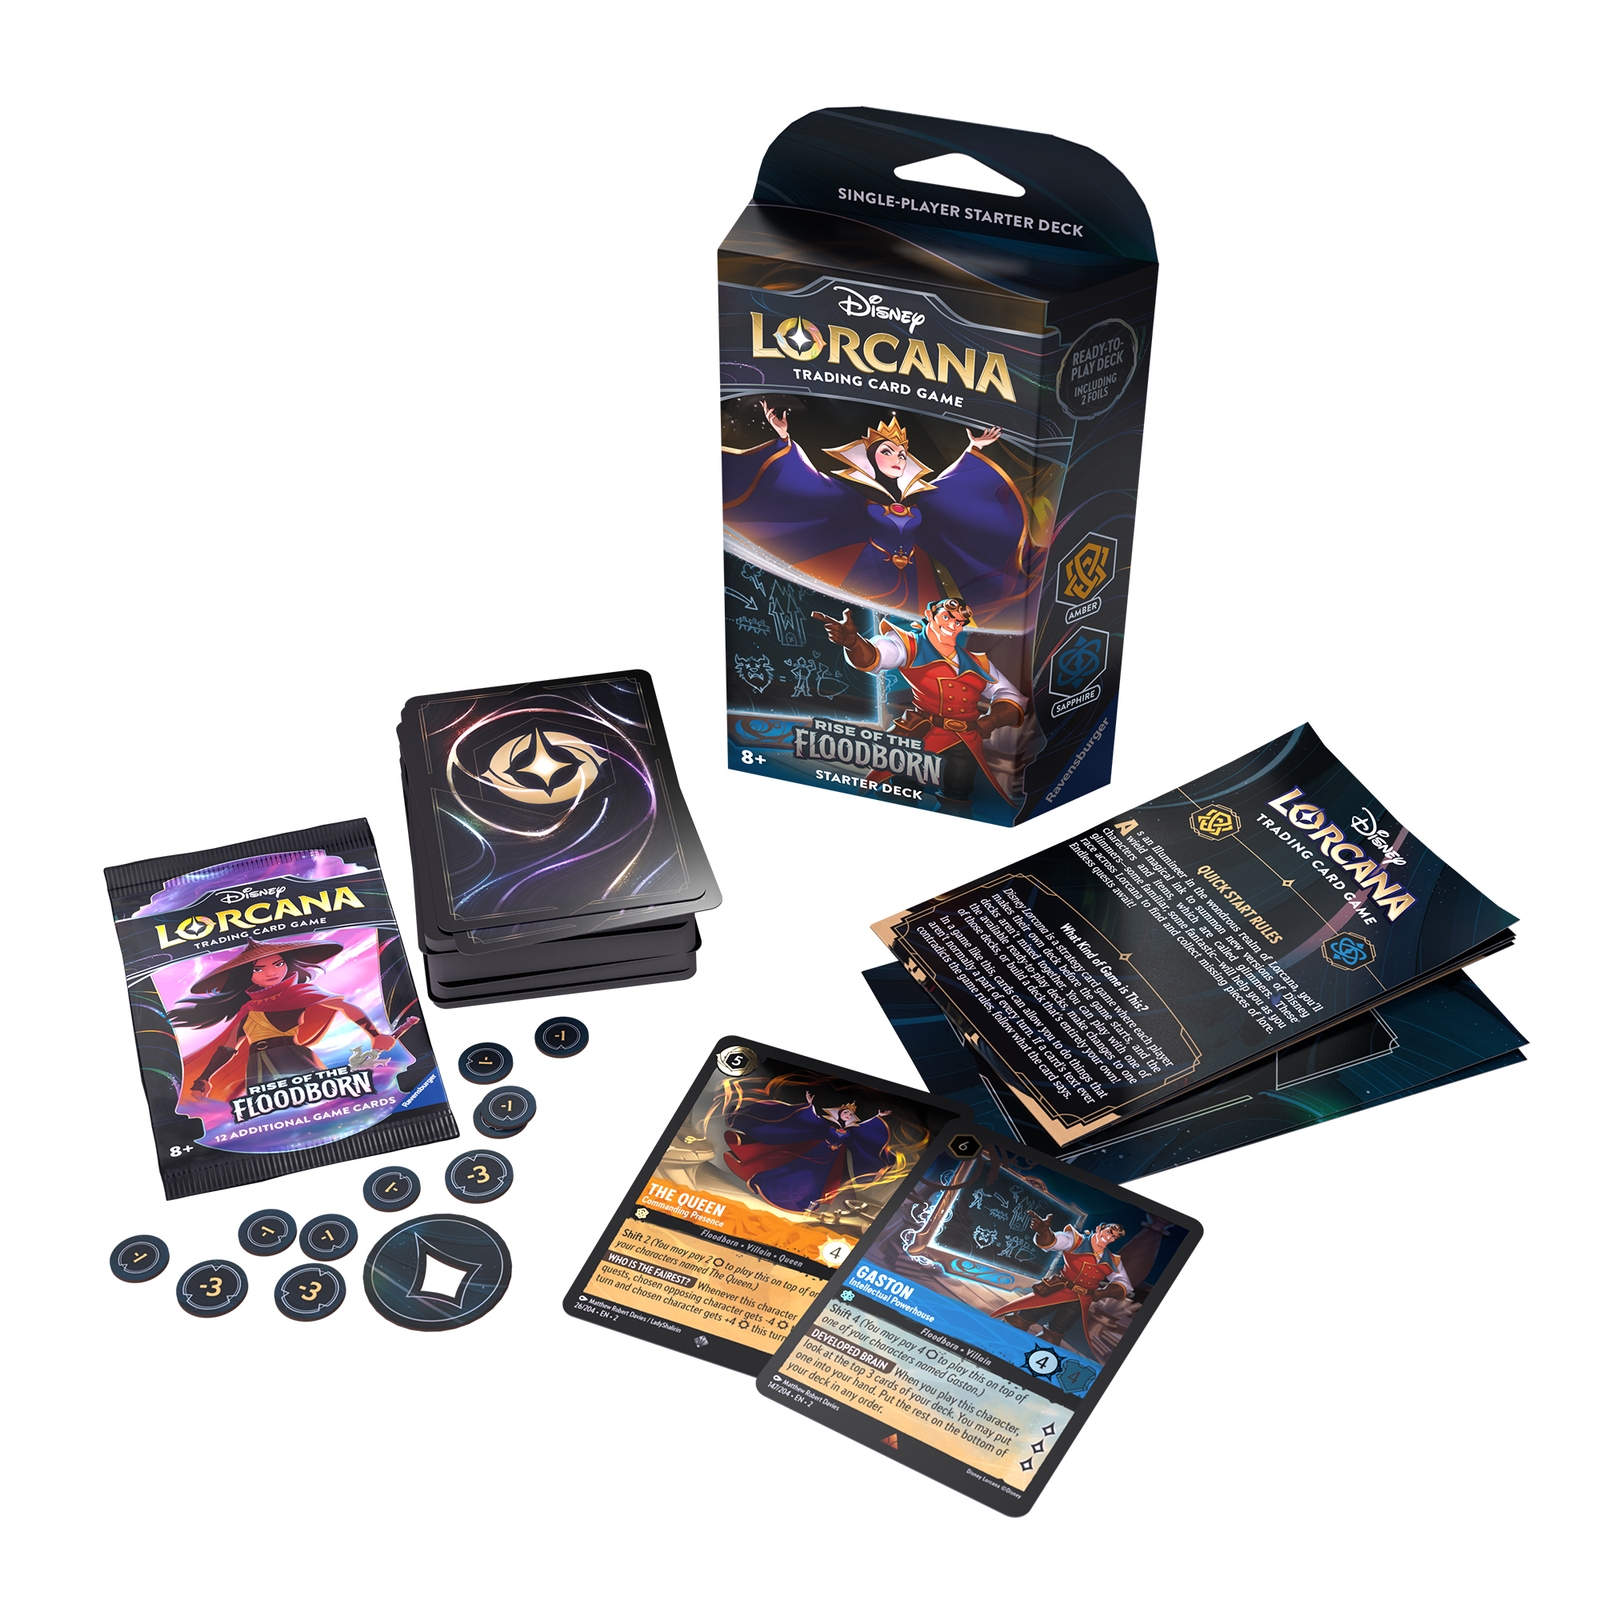 Image of Disney Lorcana Trading Card Game Rise of the Flooborn Amber and Sapphire Starter Deck